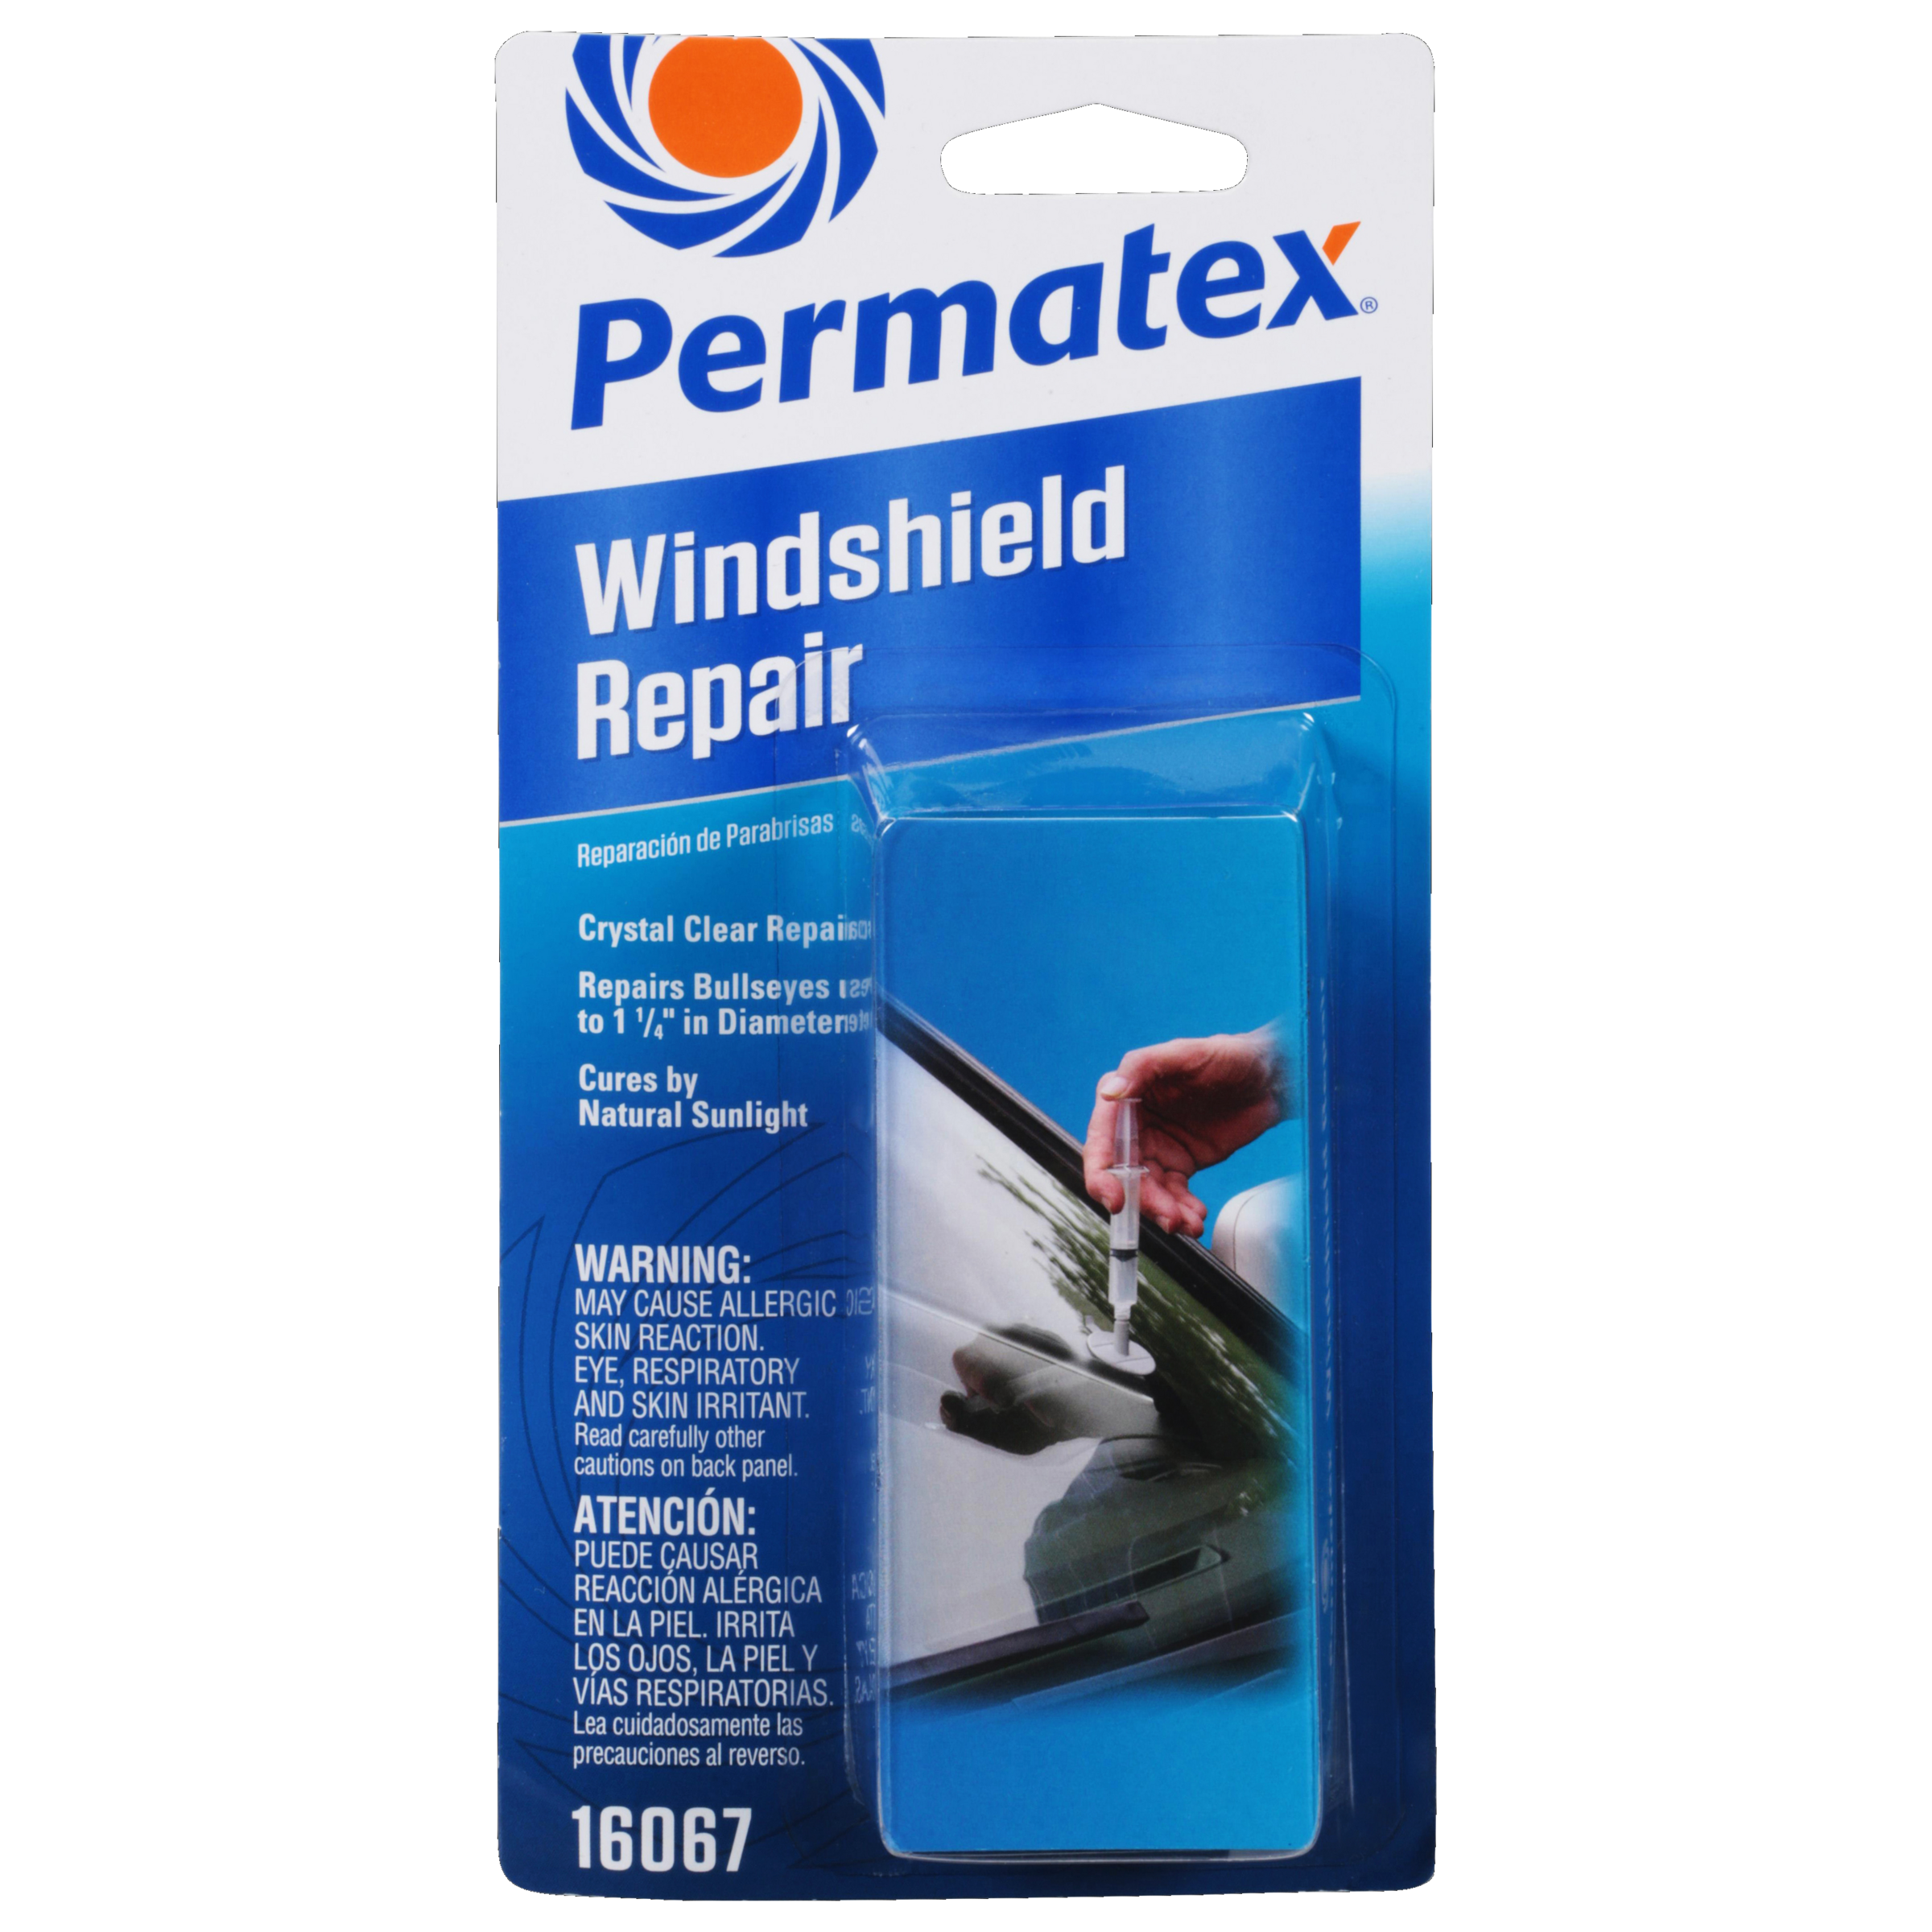 Permatex 16067 1 kit complet - chacun